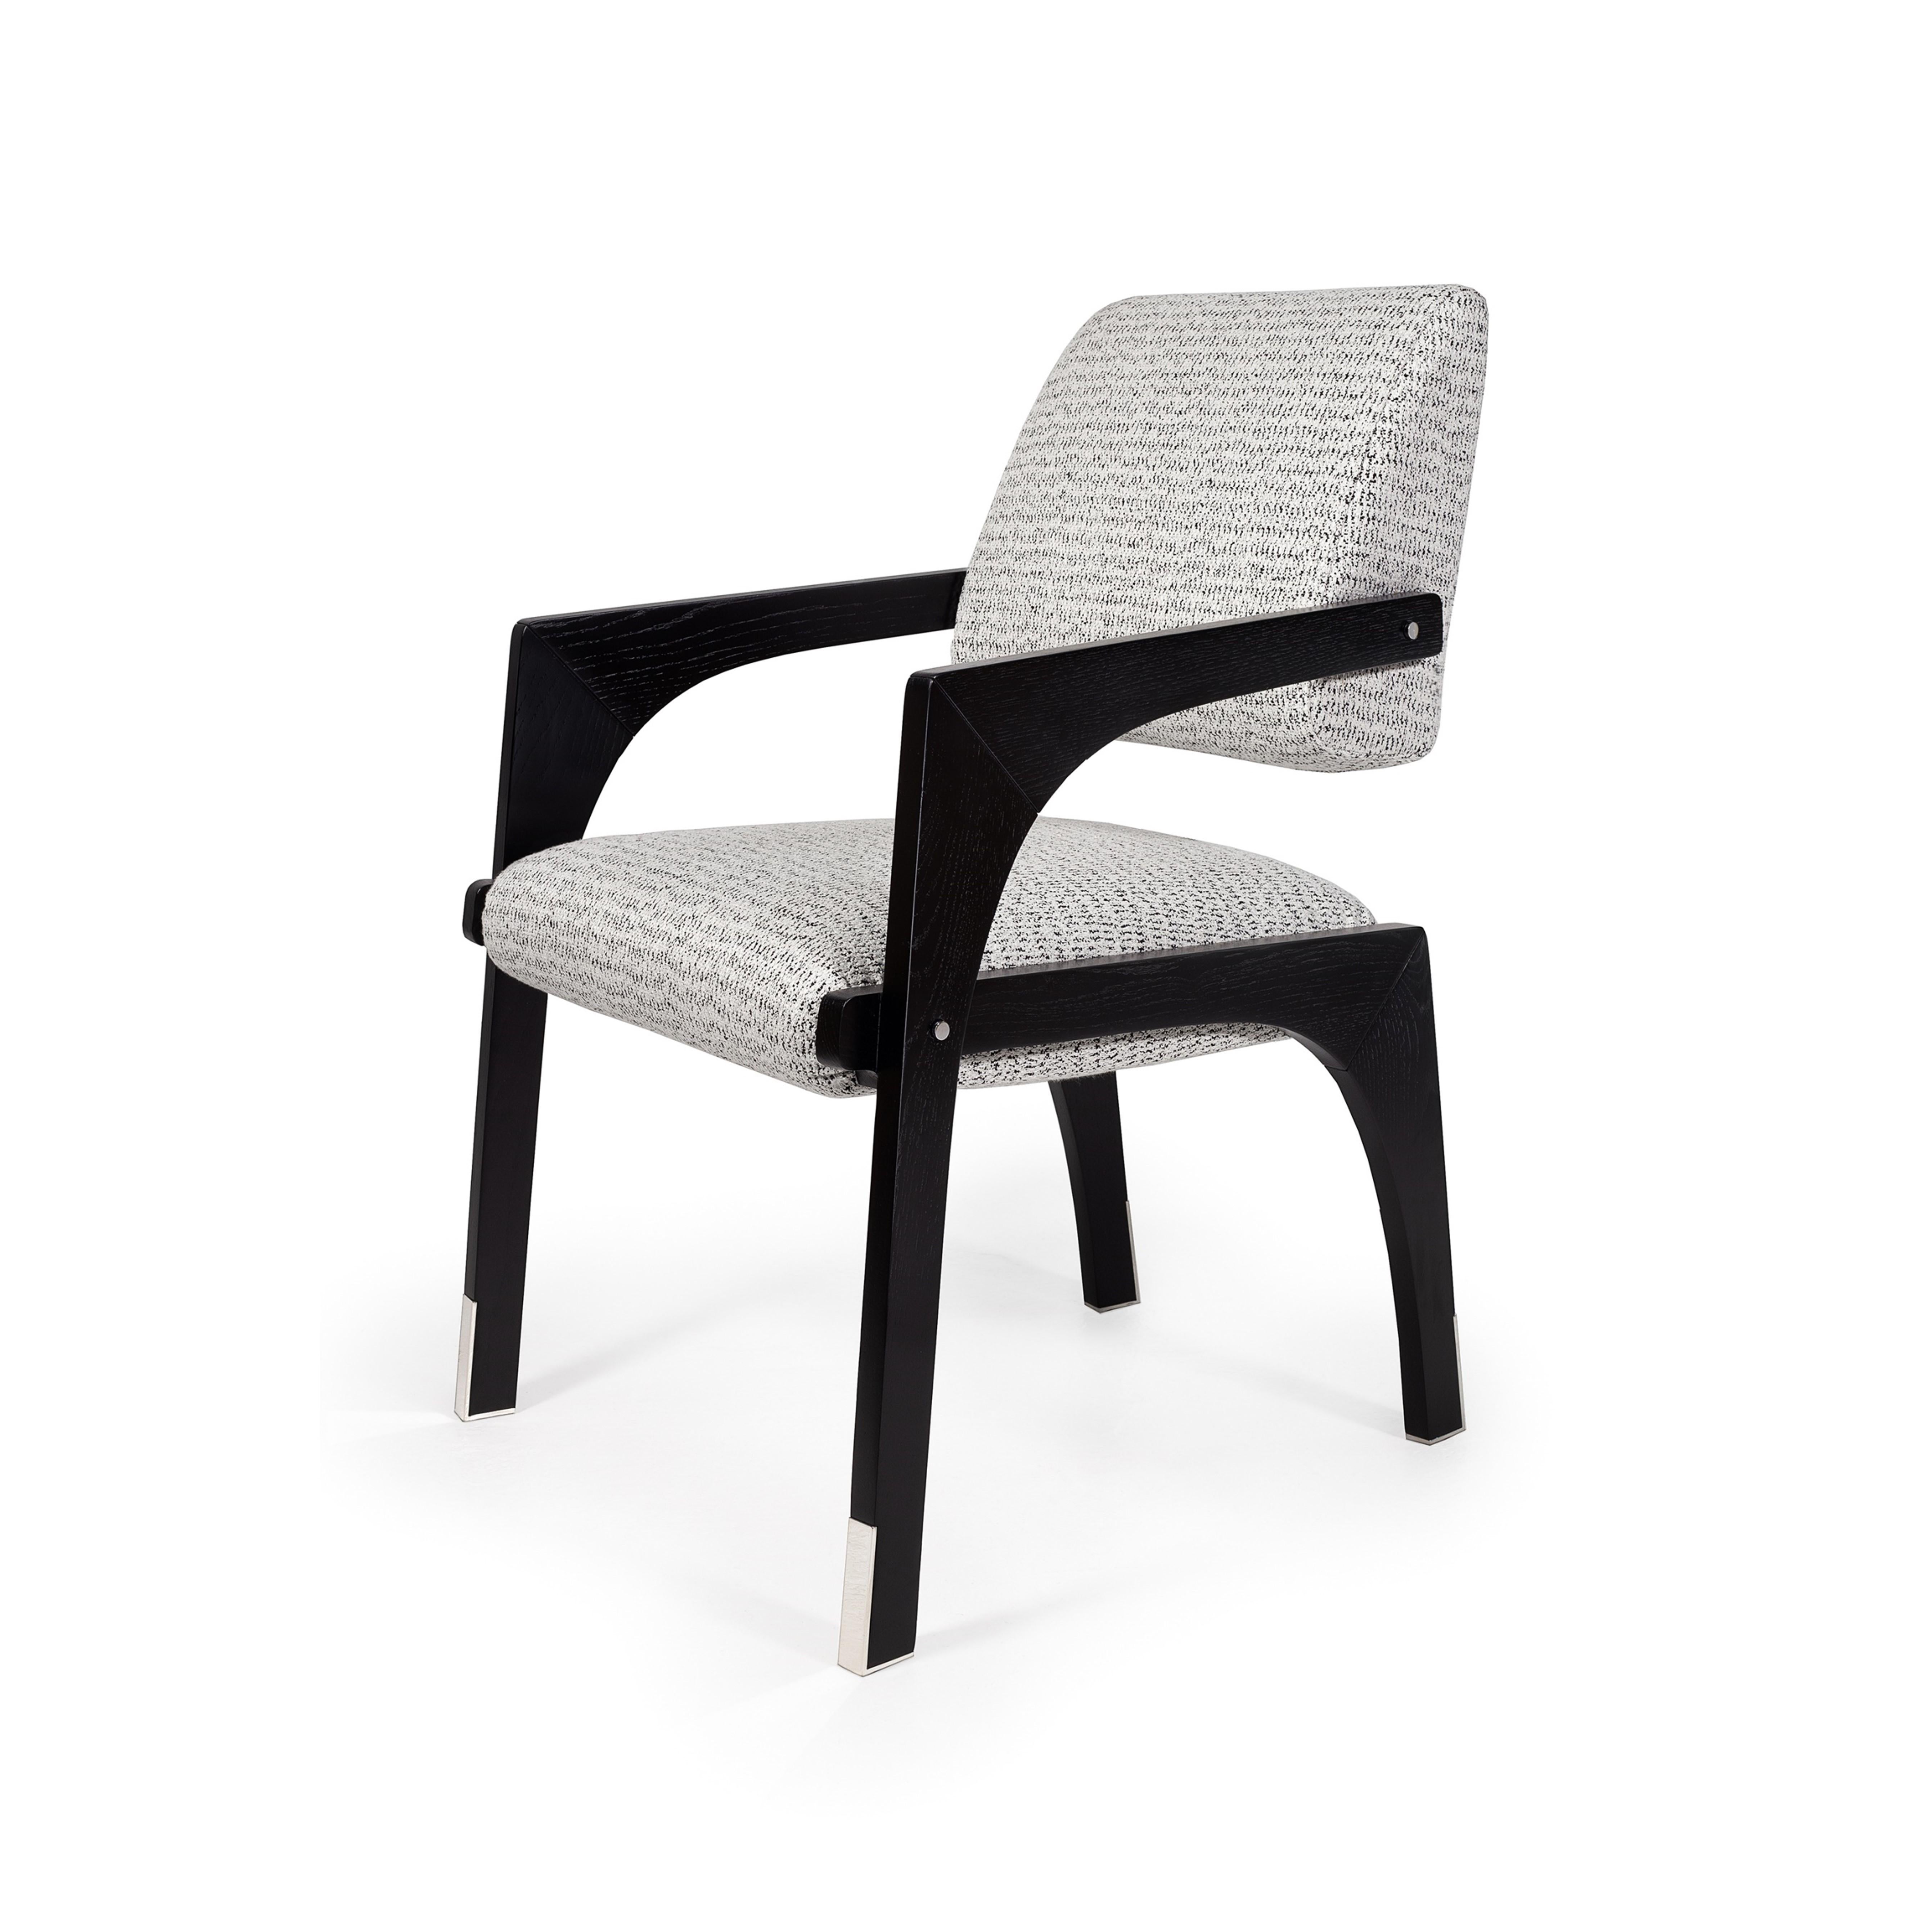 Modern Arches Dining Chair, Fusion & Steel, InsidherLand by Joana Santos Barbosa For Sale